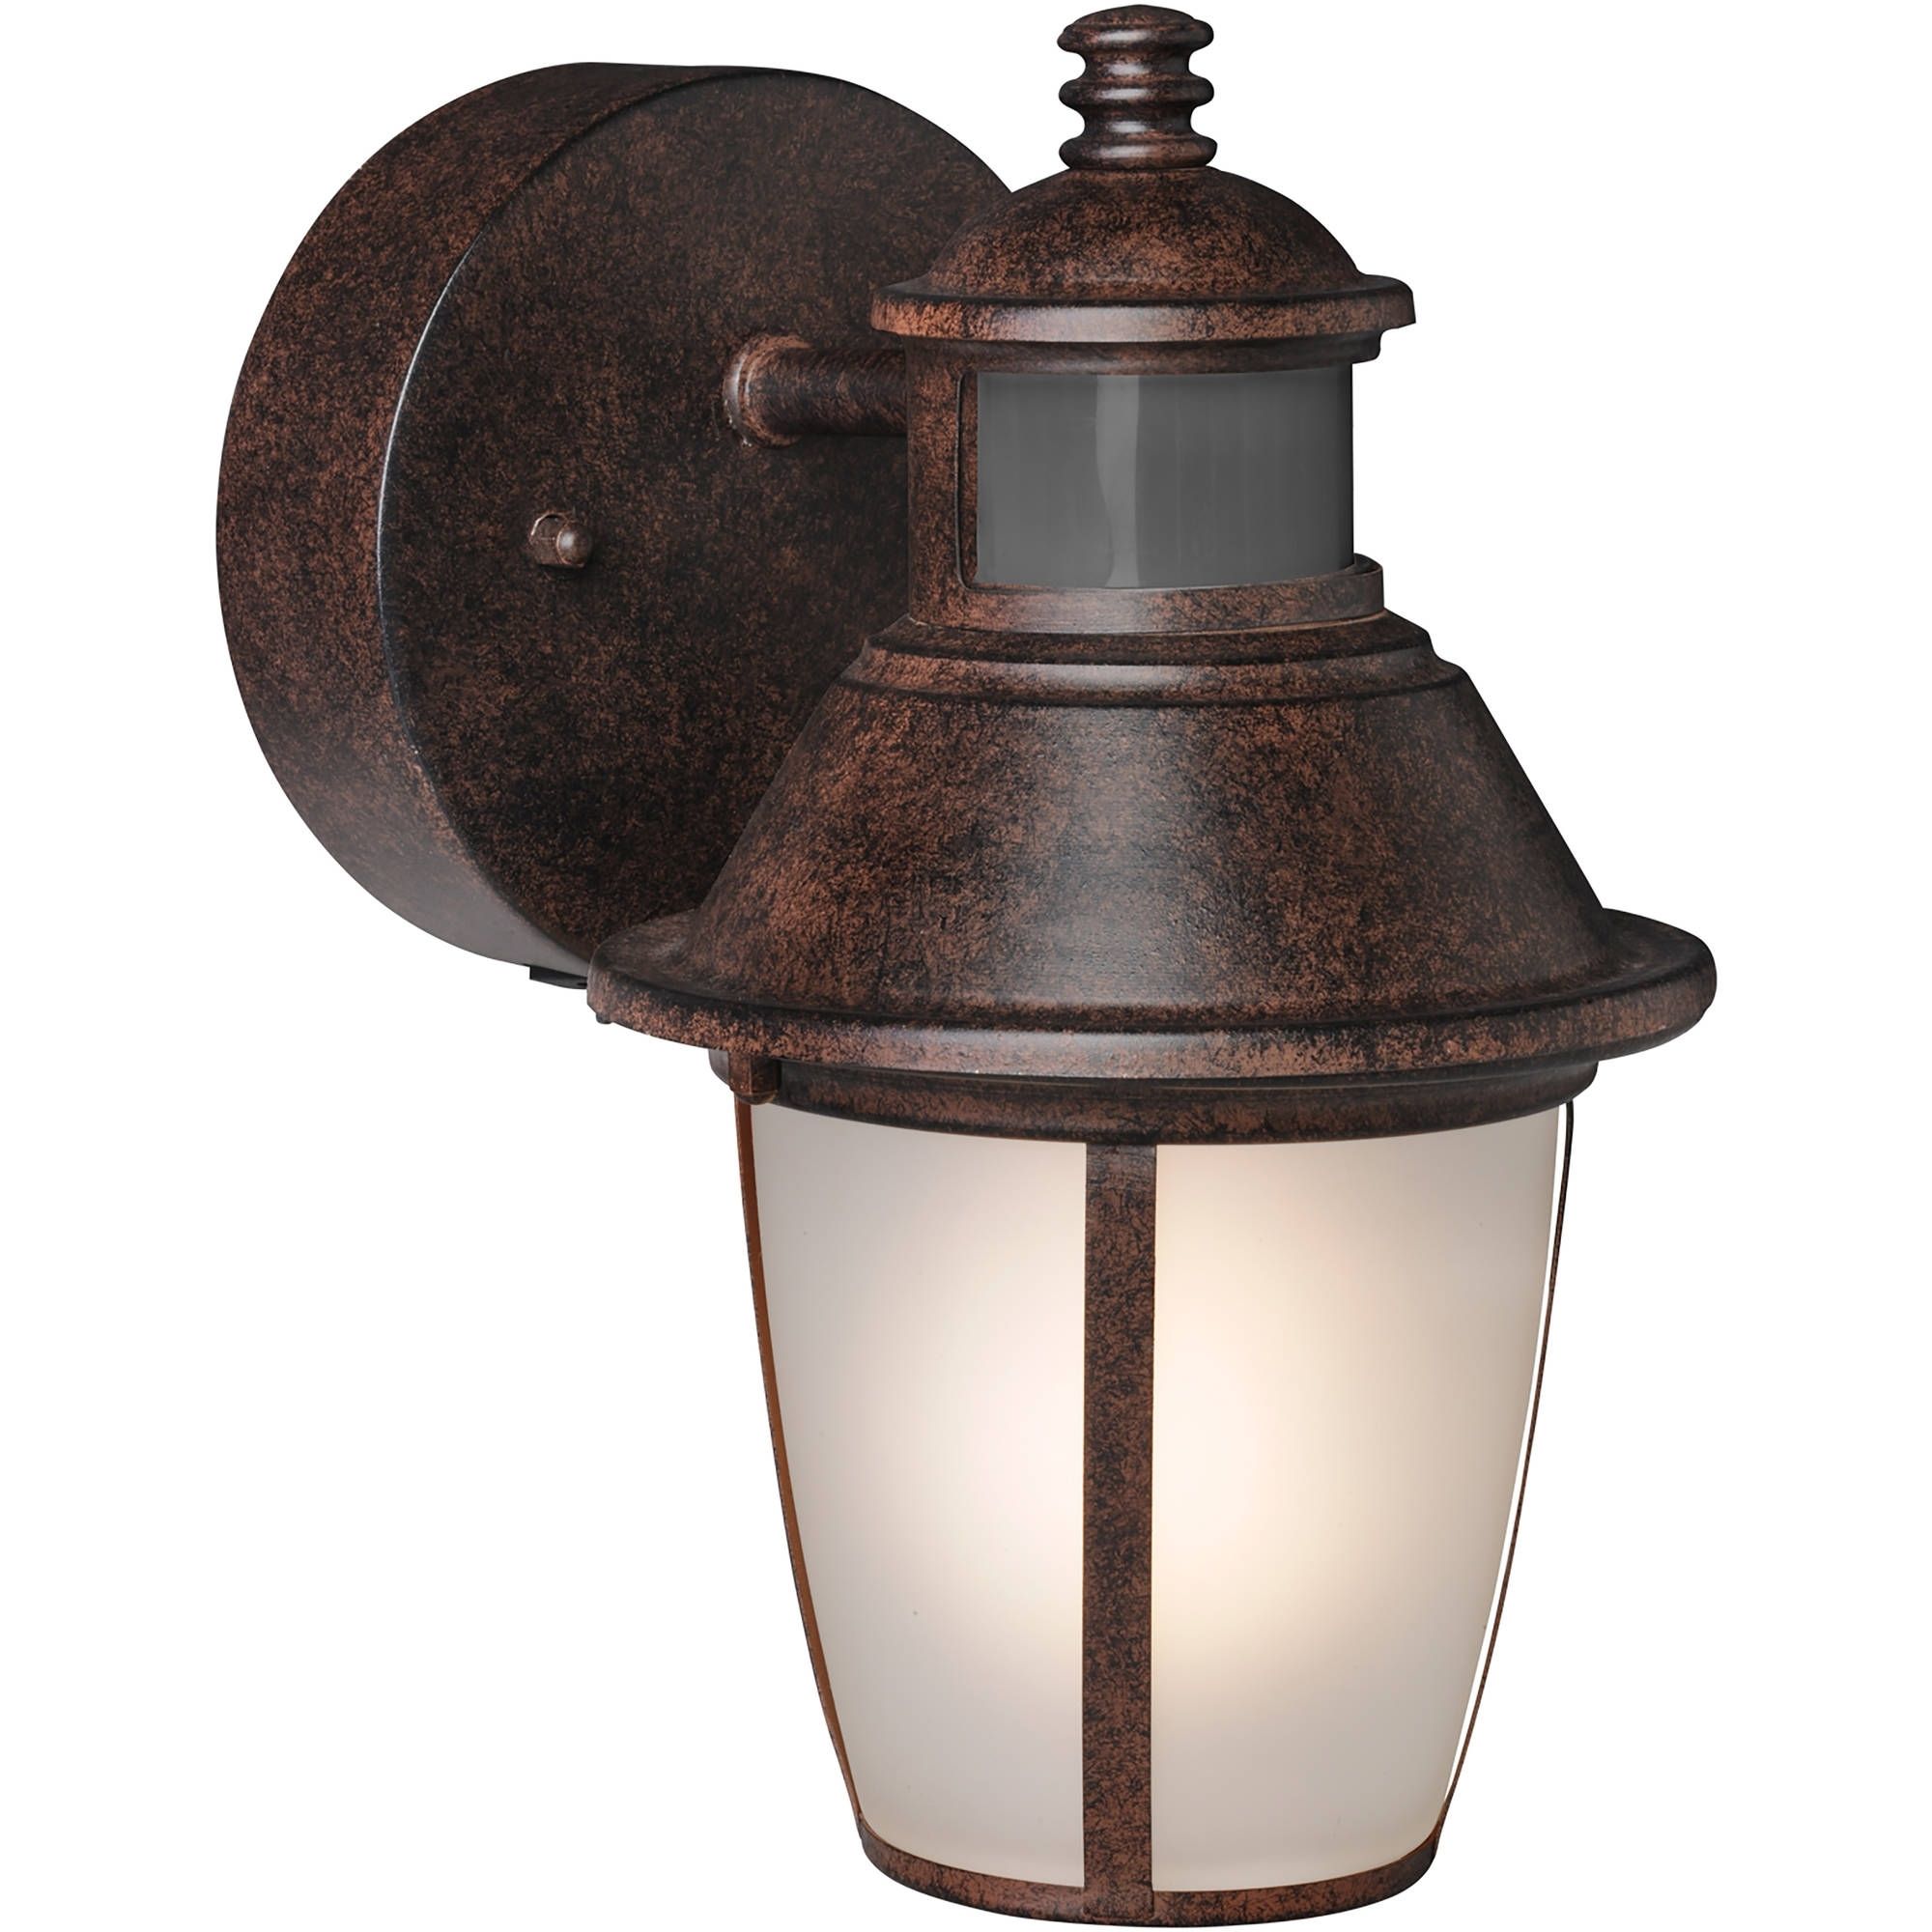 Brink's Led Outdoor Wall Lantern Motion Security Light, Bronze In Led Outdoor Wall Lights With Motion Sensor (View 13 of 15)